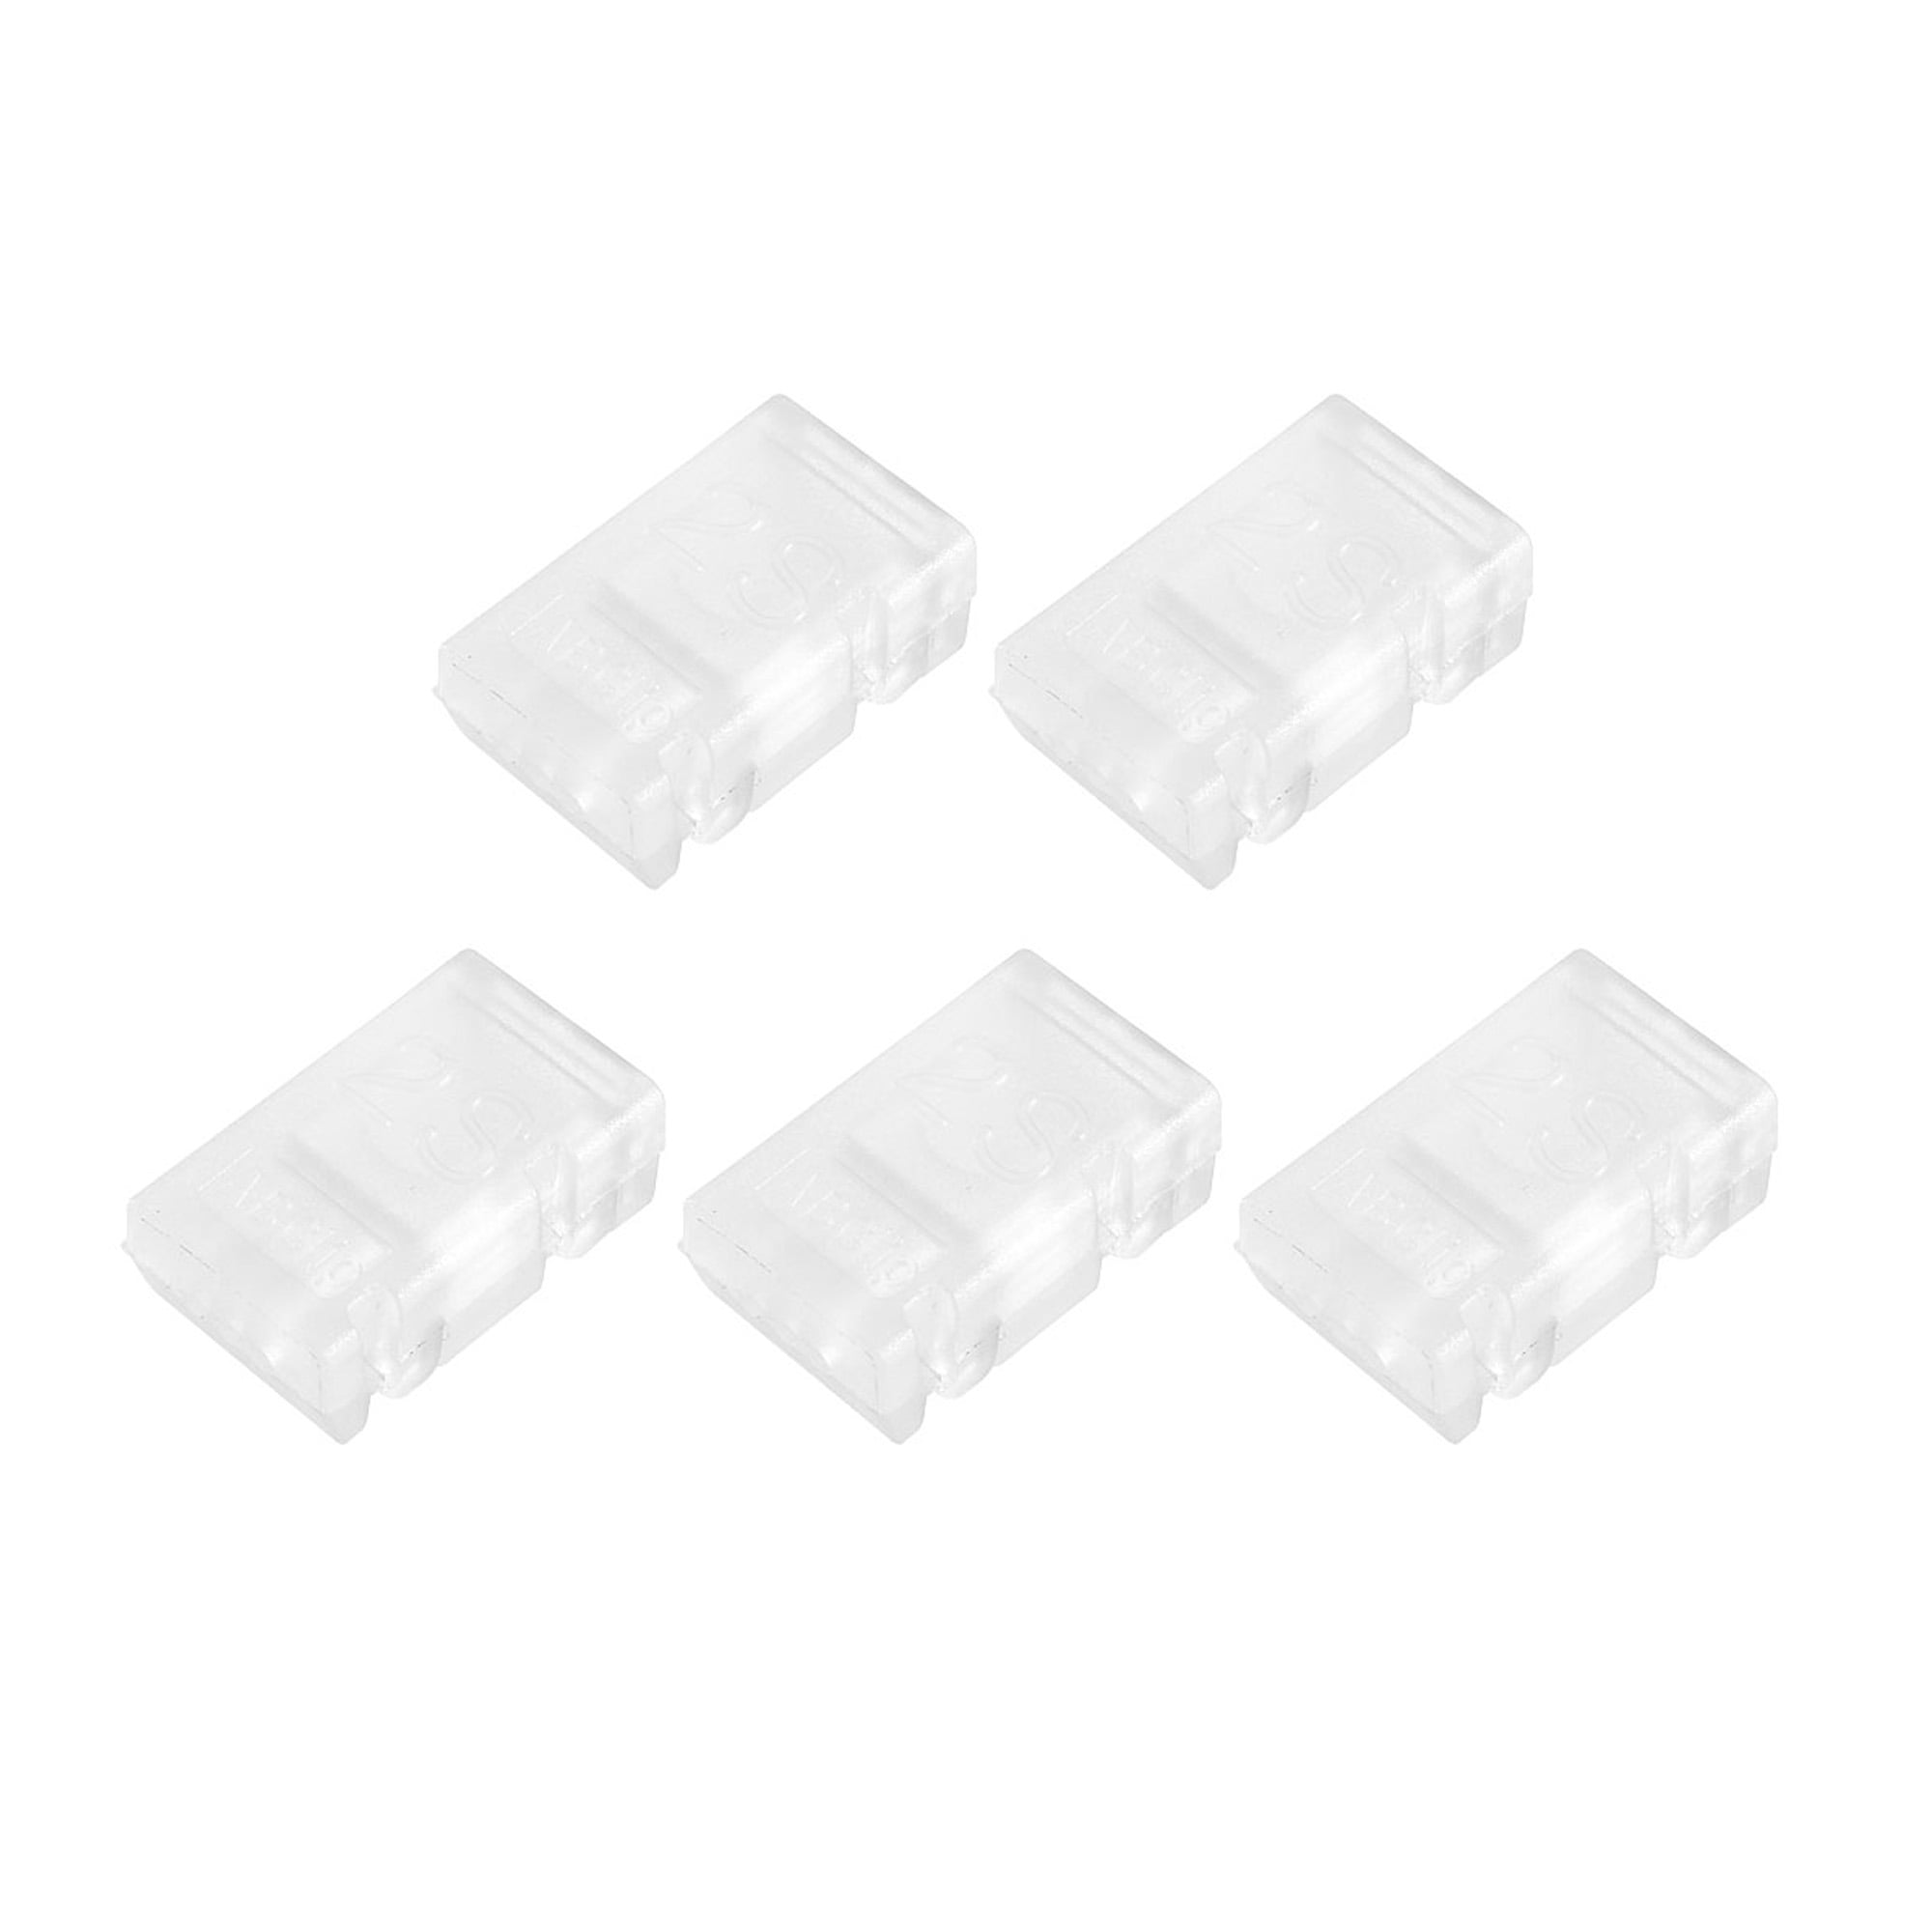 Approximately 20 RC model LiPo battery AB clips 5 selections 